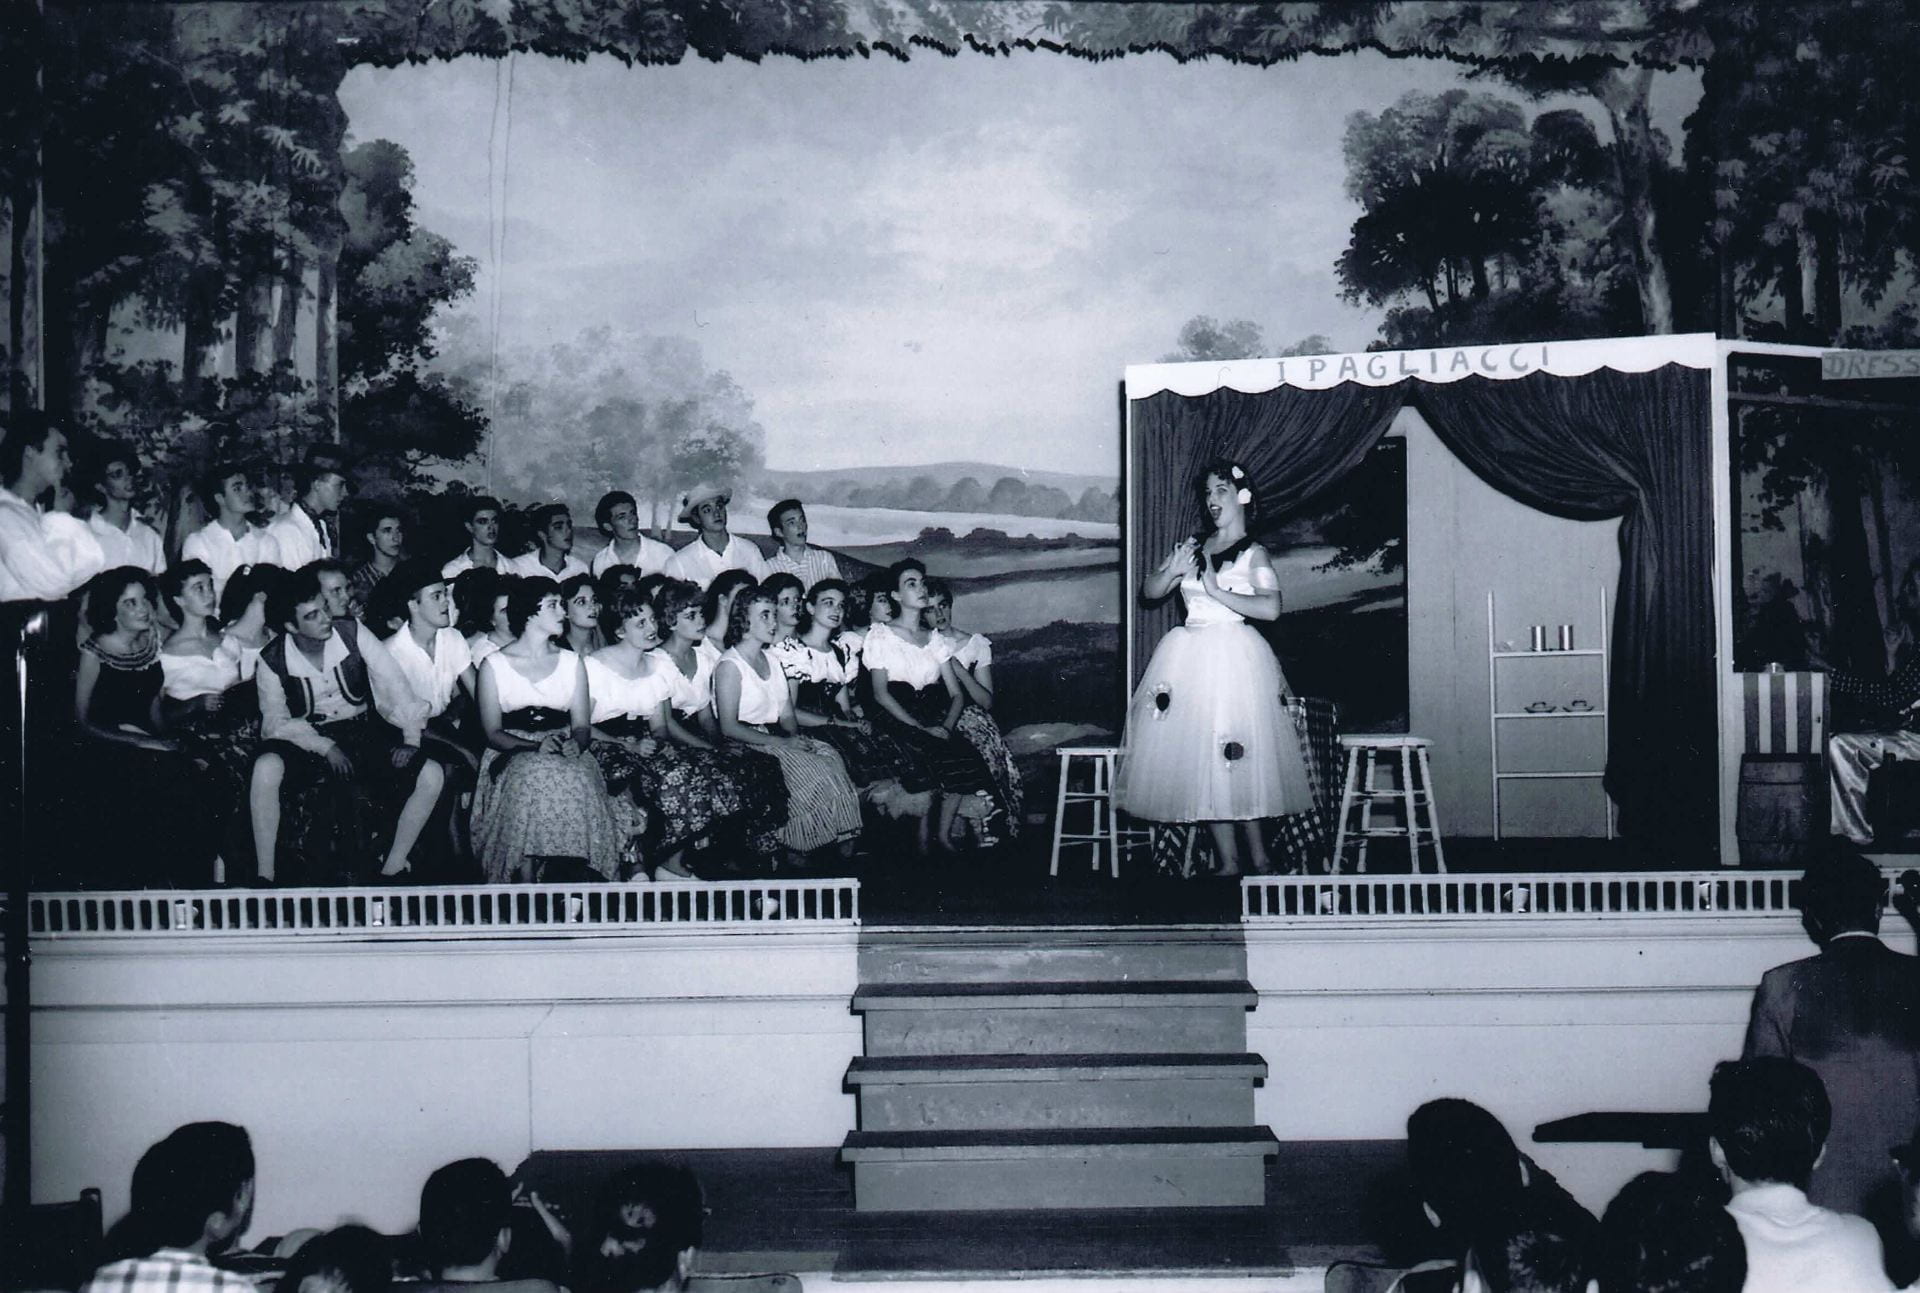 Archival photo of Opera in the Ozarks performance